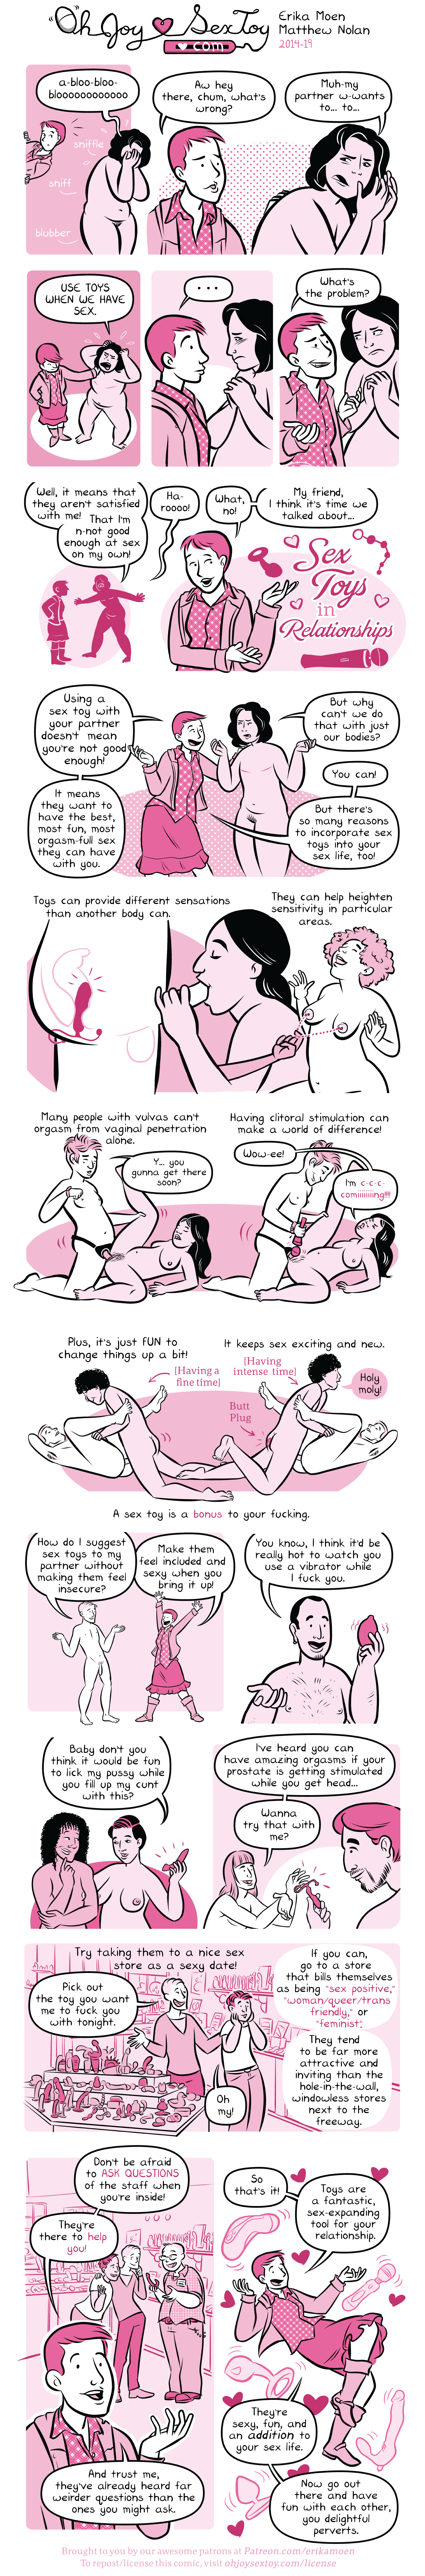 Sex Toys in Relationships